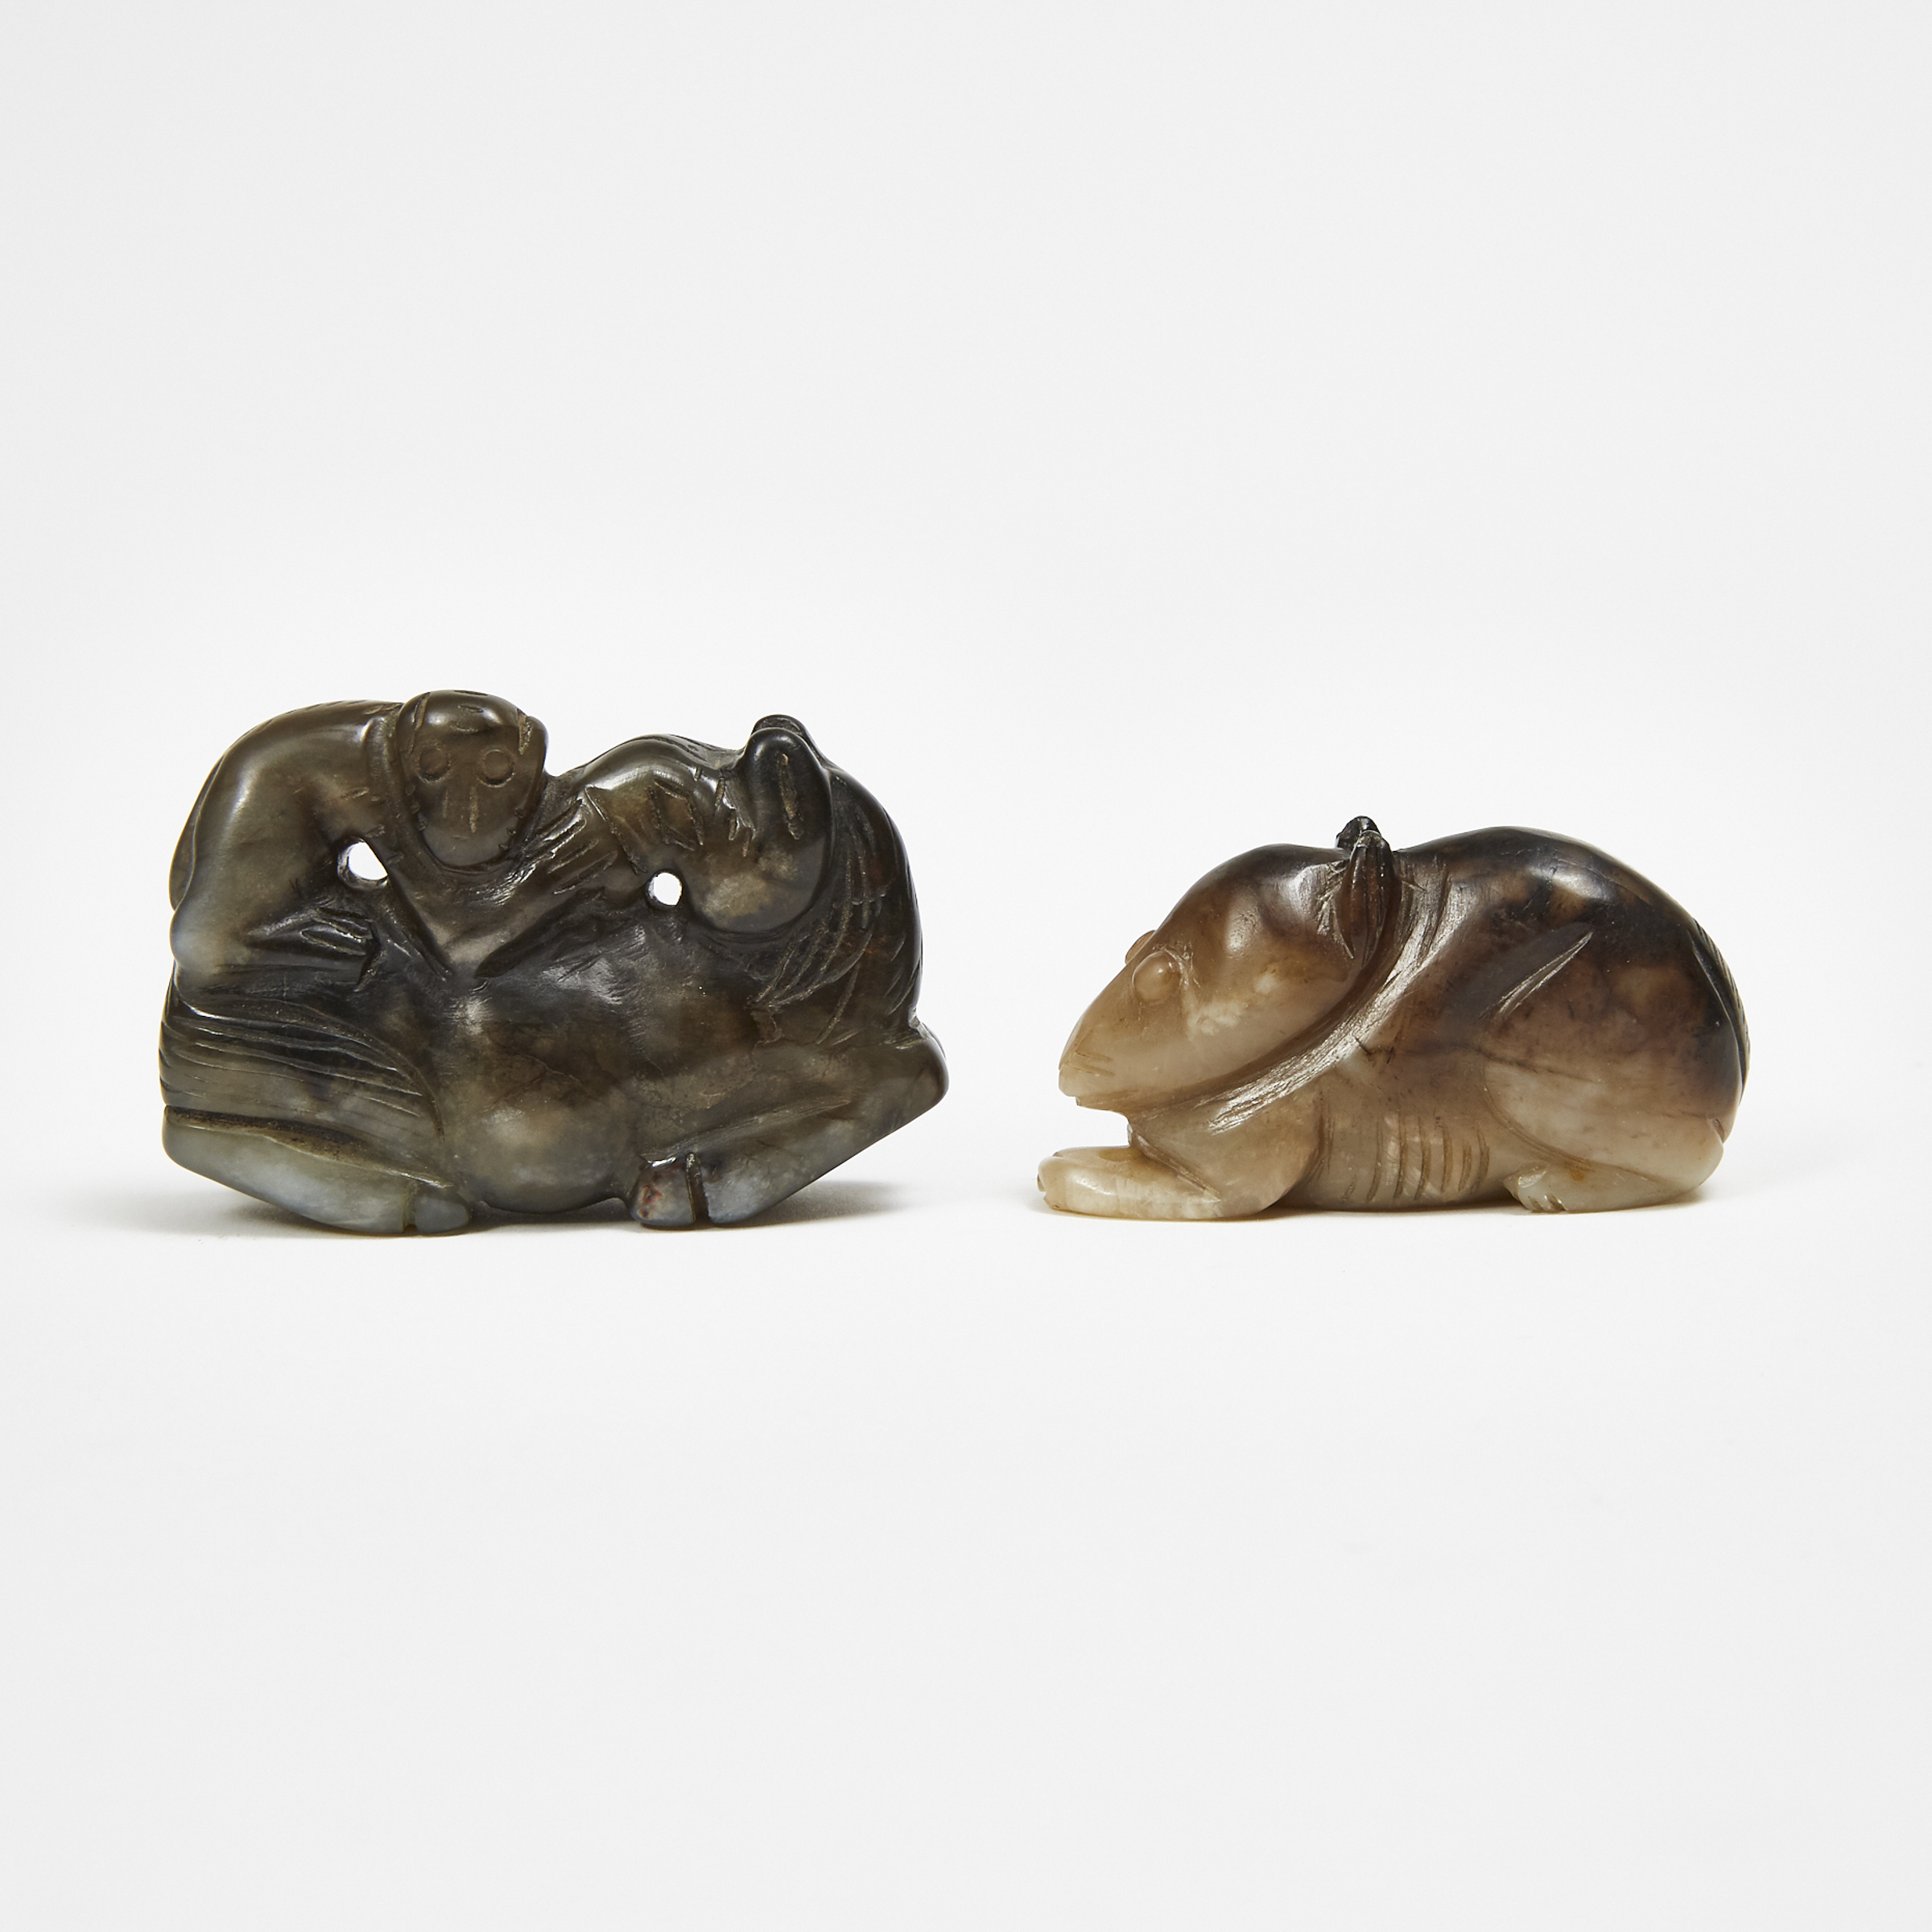 A Black and Russet Jade Carving of Monkey and Horse Group, together with a Black and Russet Jade Carving of a Rabbit